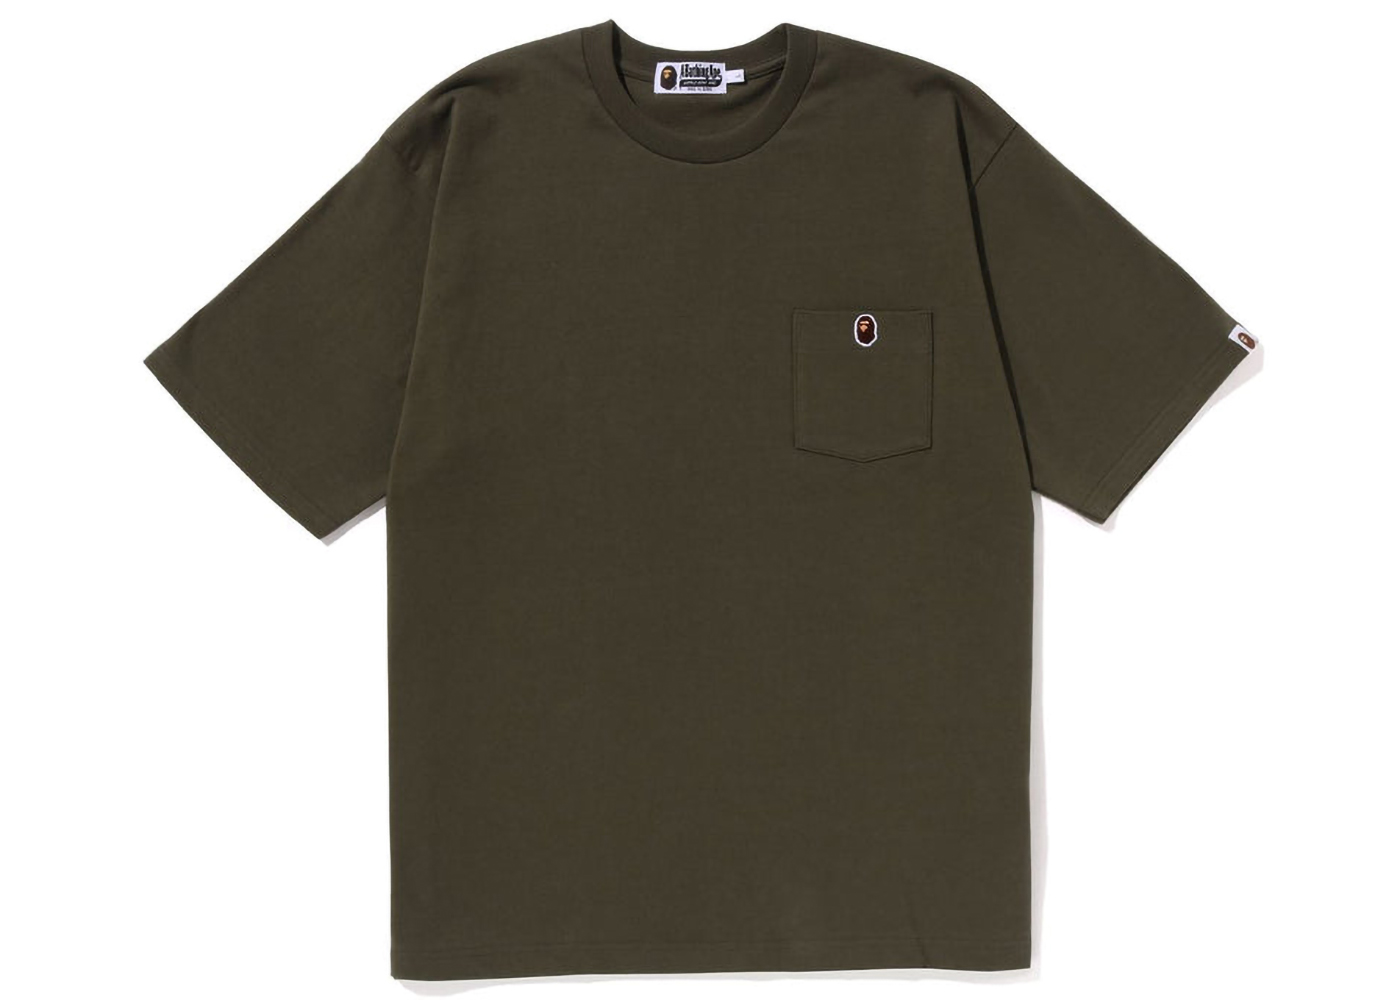 BAPE Reflective Solid Camo Ape Head Relaxed Fit Pocket L/S Tee Black